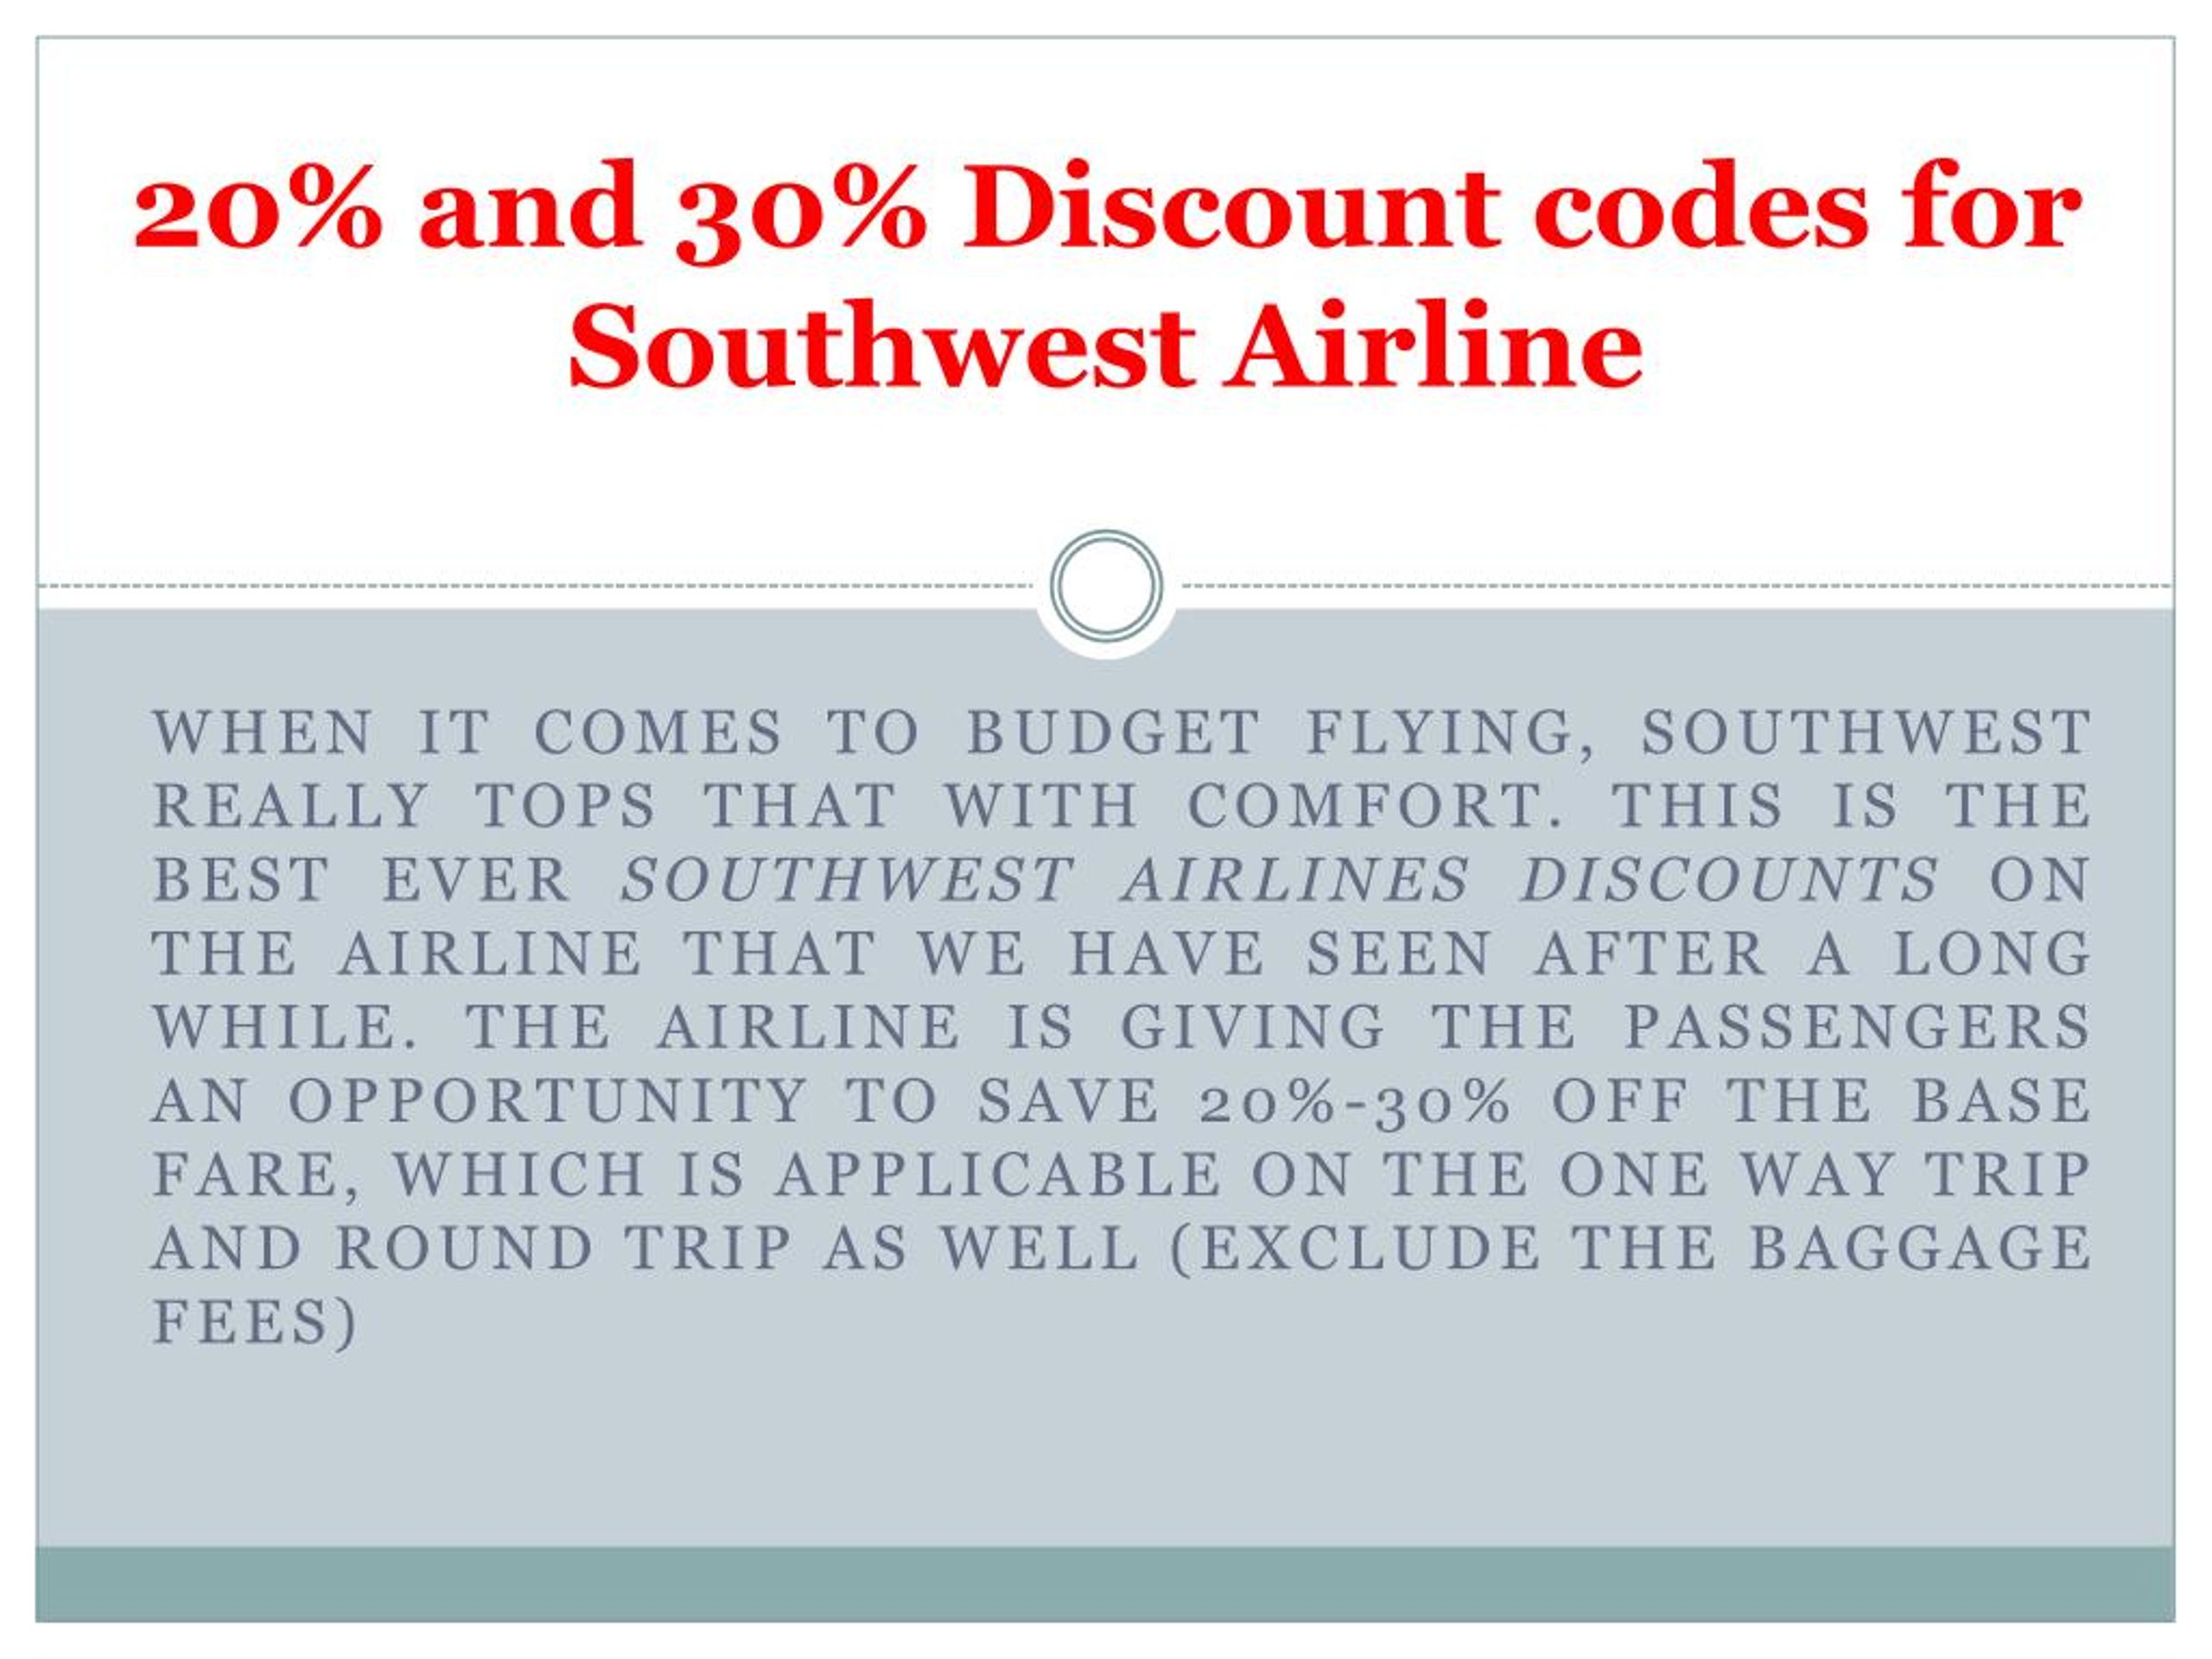 PPT 20 and 30 Discount codes for Southwest Airline PowerPoint